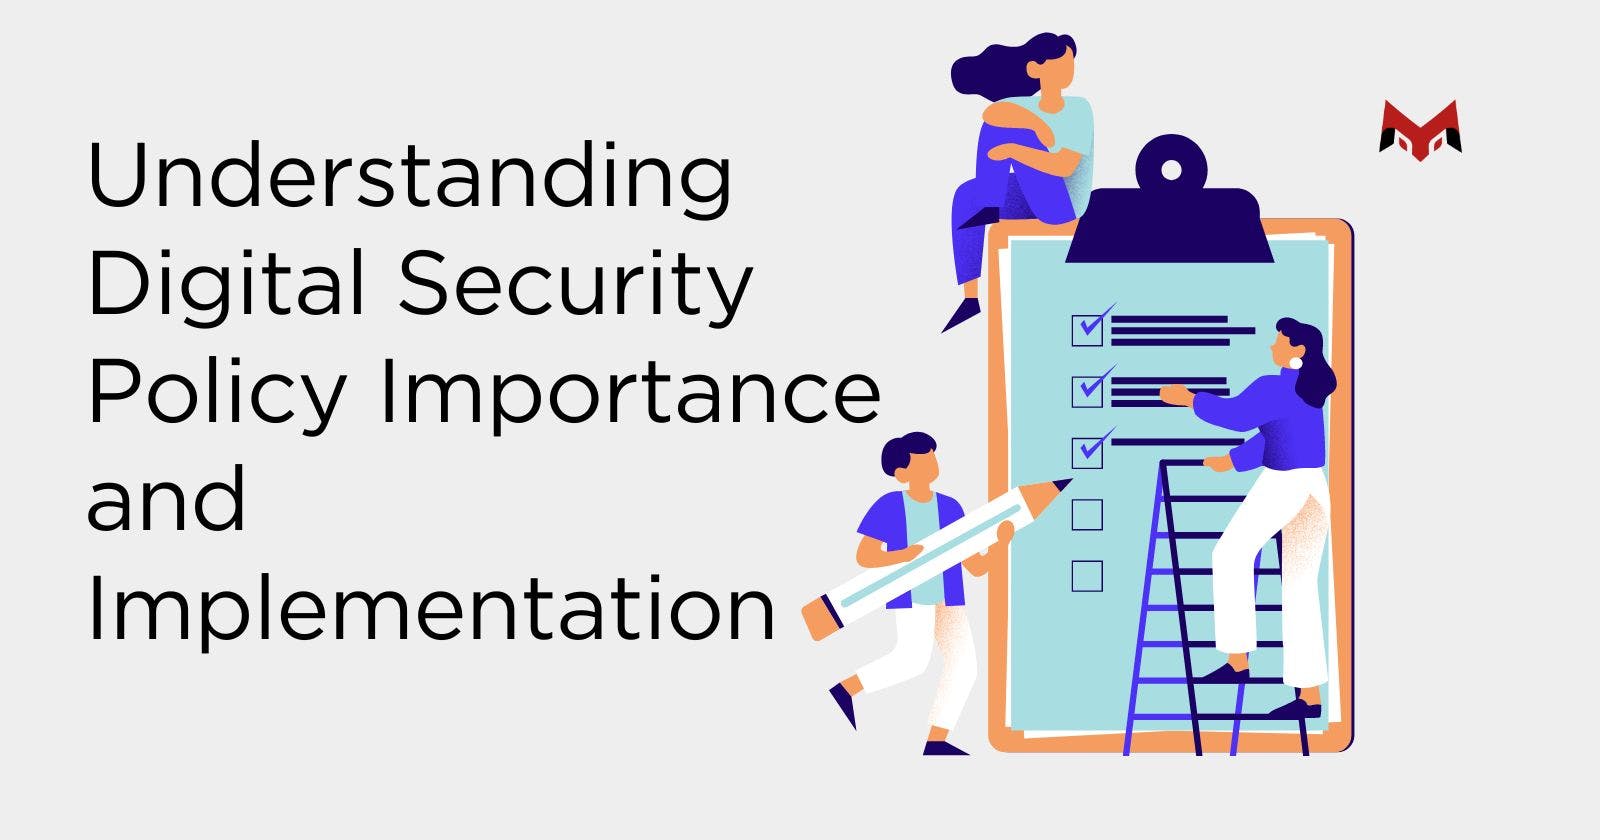 Understanding Digital Security Policy Importance and Implementation